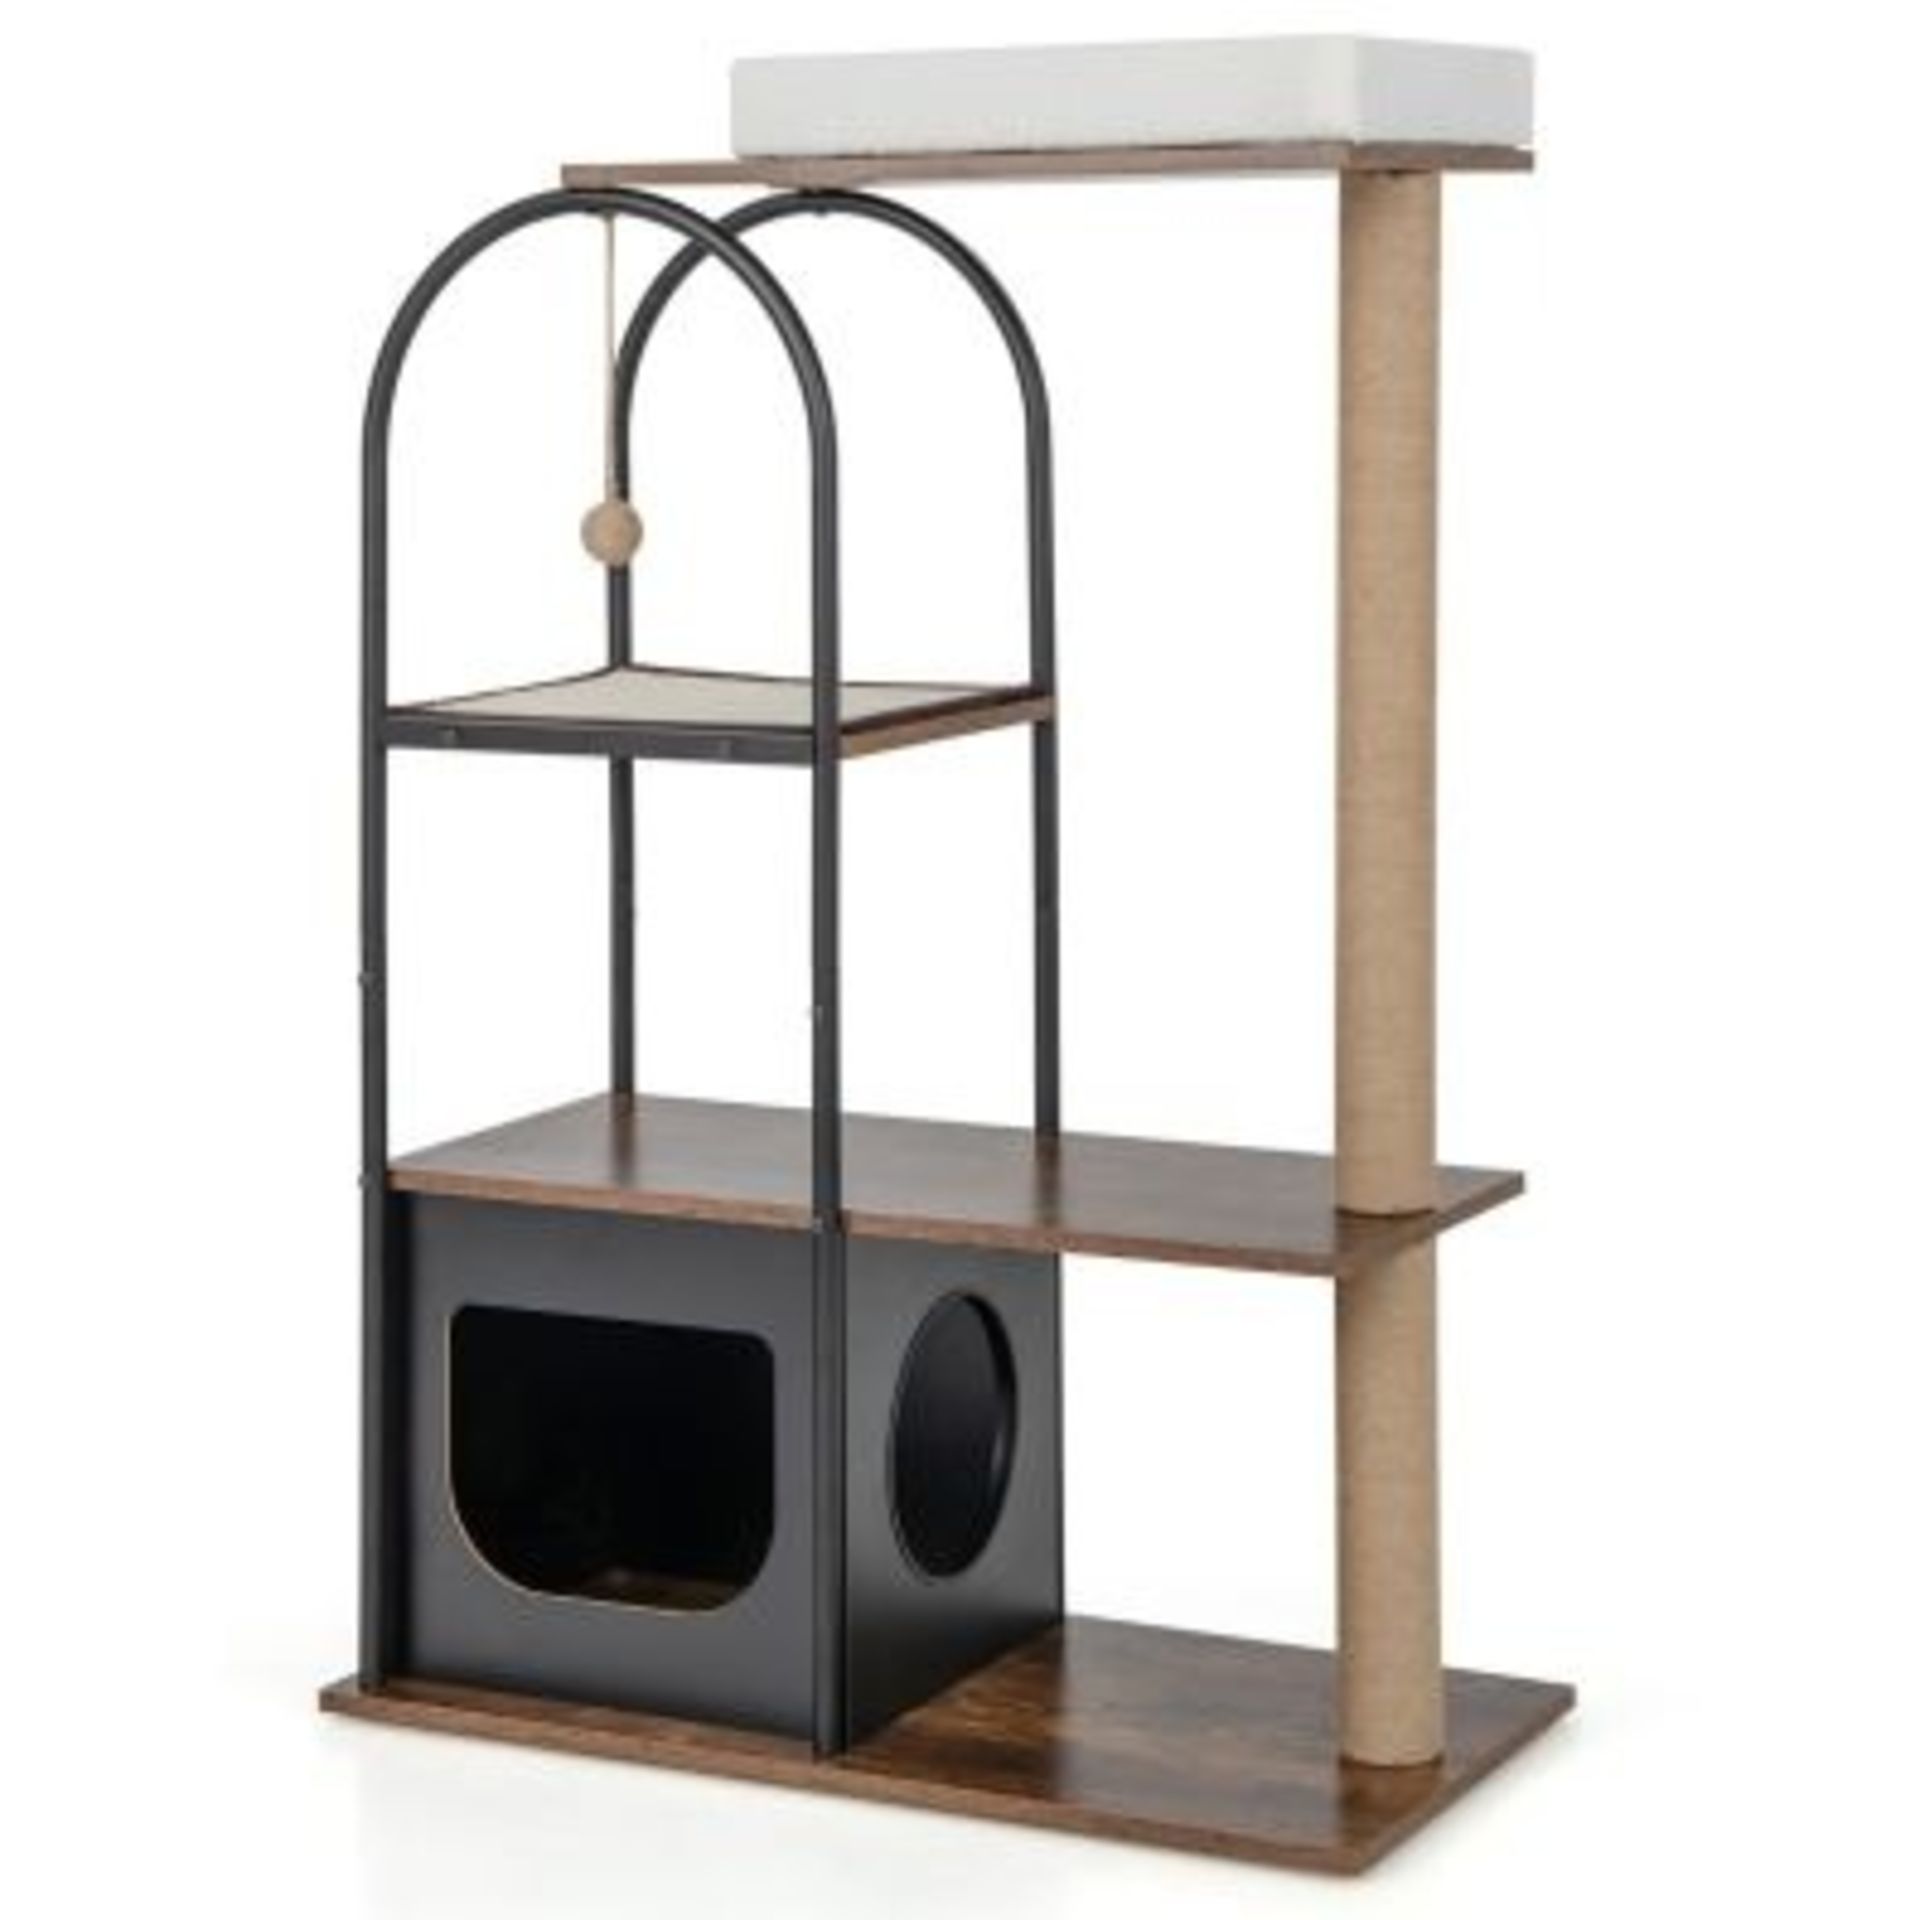 118 cm Tall Cat Tree Tower with Metal Frame - ER54